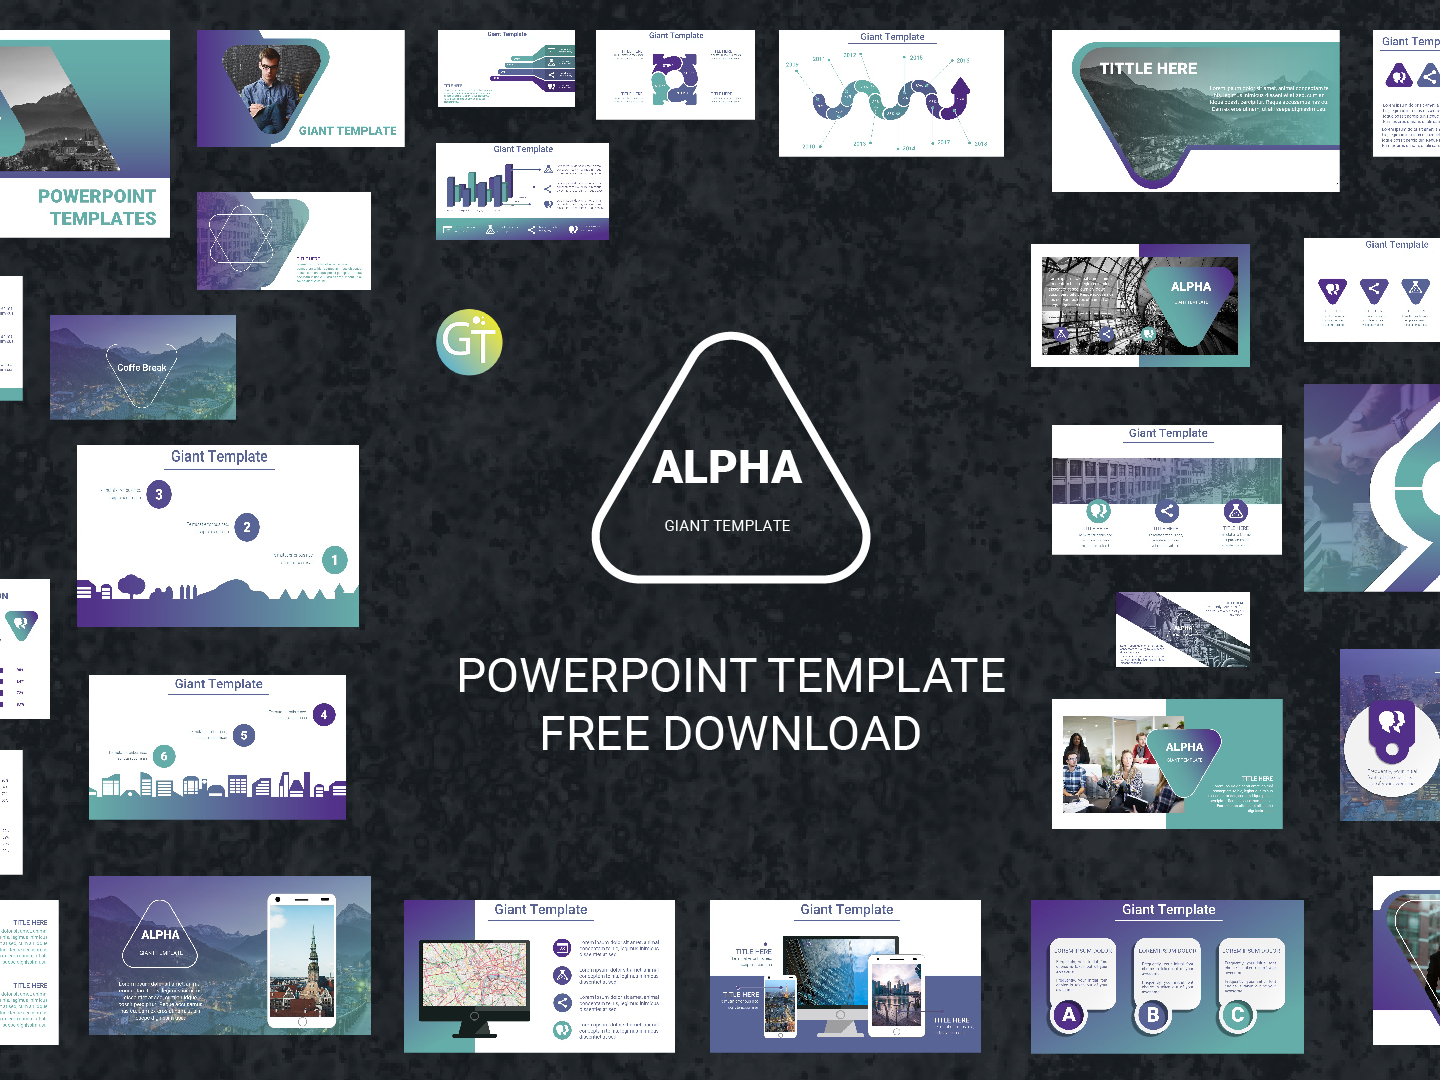 Morph Animation Powerpoint Template by Giant Template on Dribbble